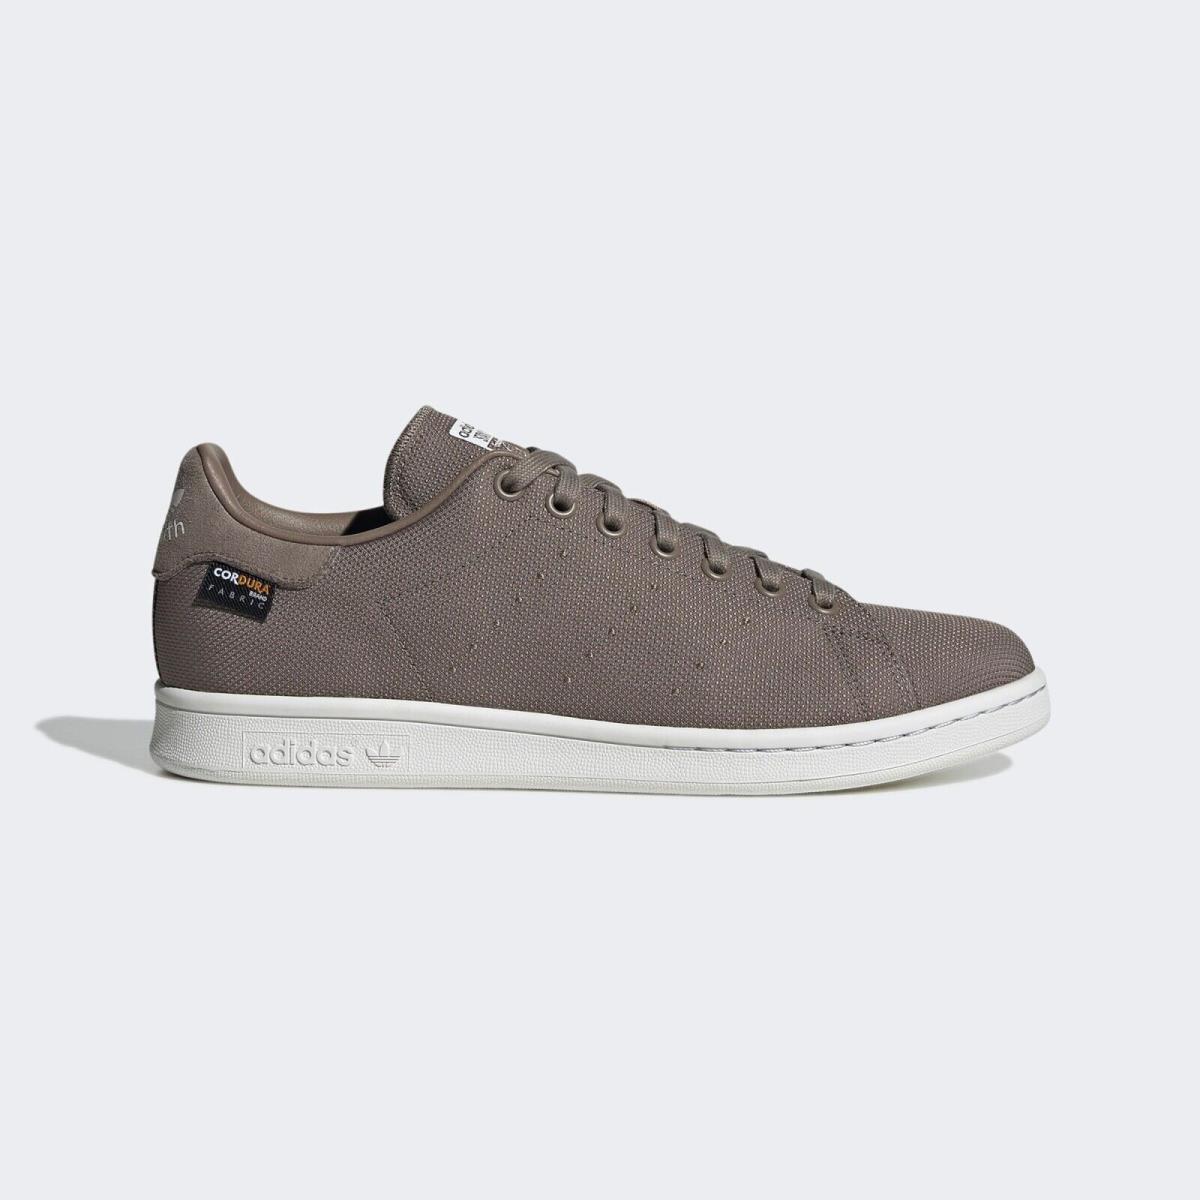 Adidas Originals Stan Smith Men`s Shoes GY5965 Simple Brown/white -select Size